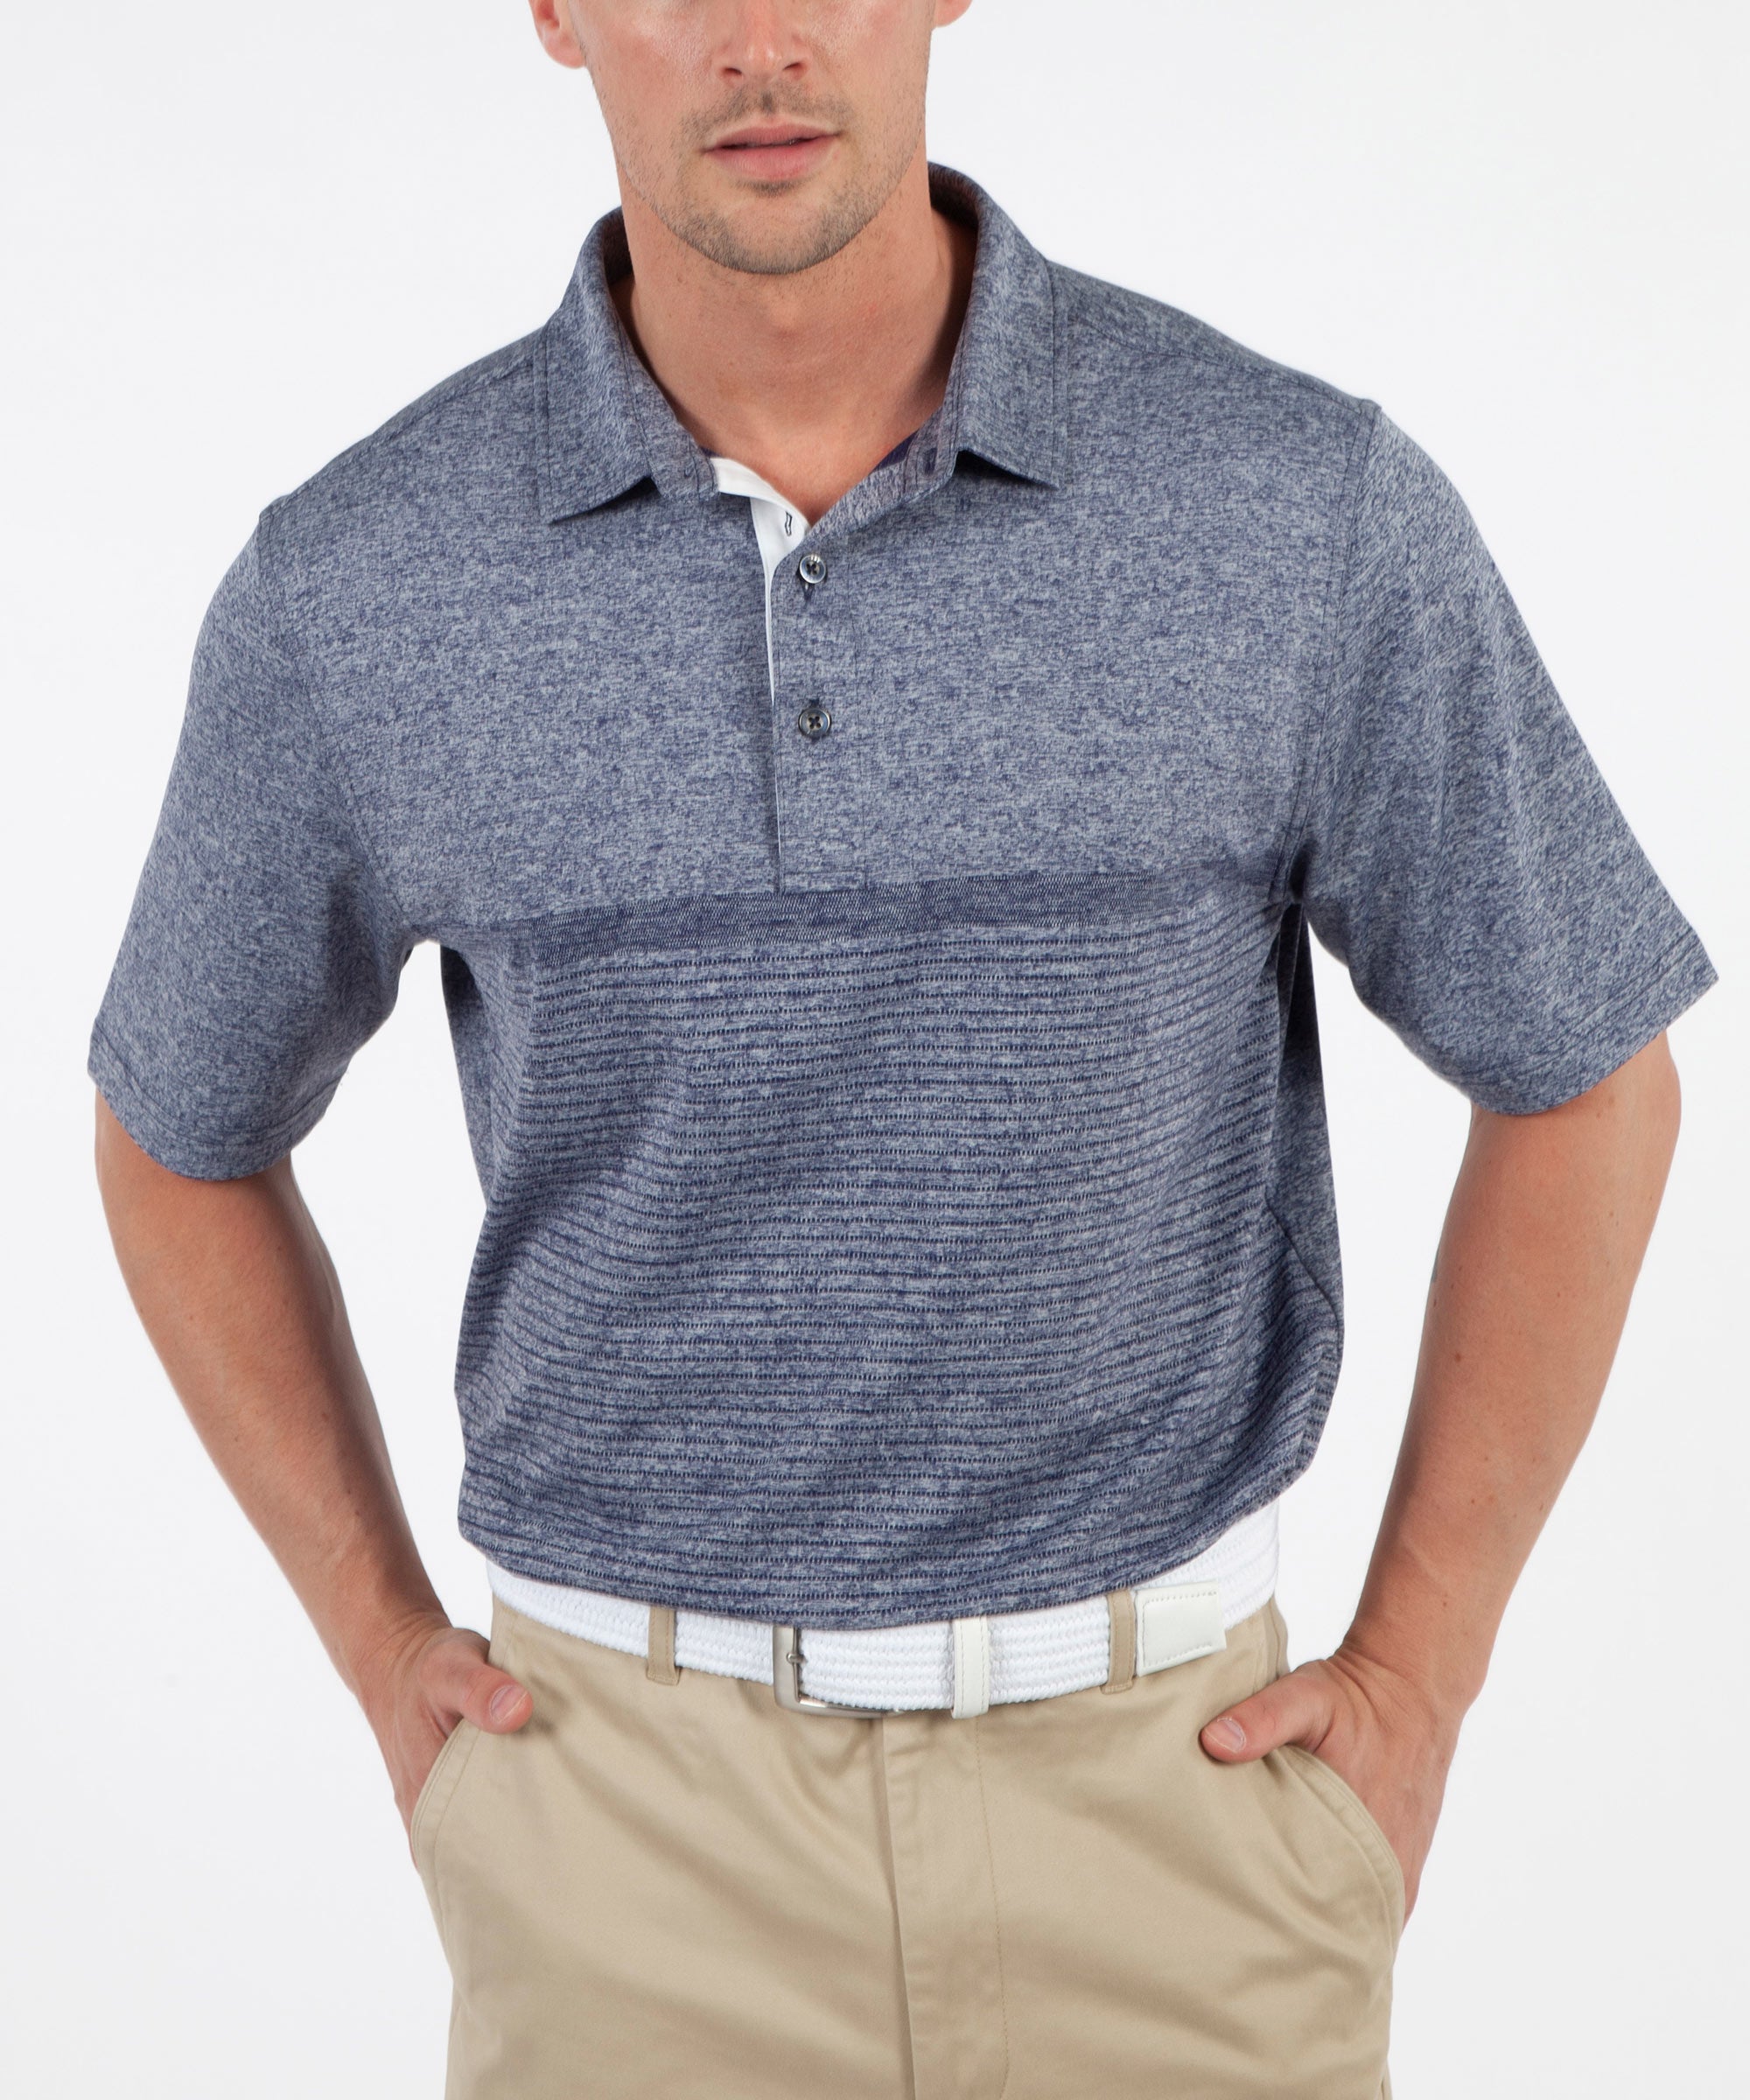 Under Armour Men's Playoff Jacquard Long Sleeve Polo